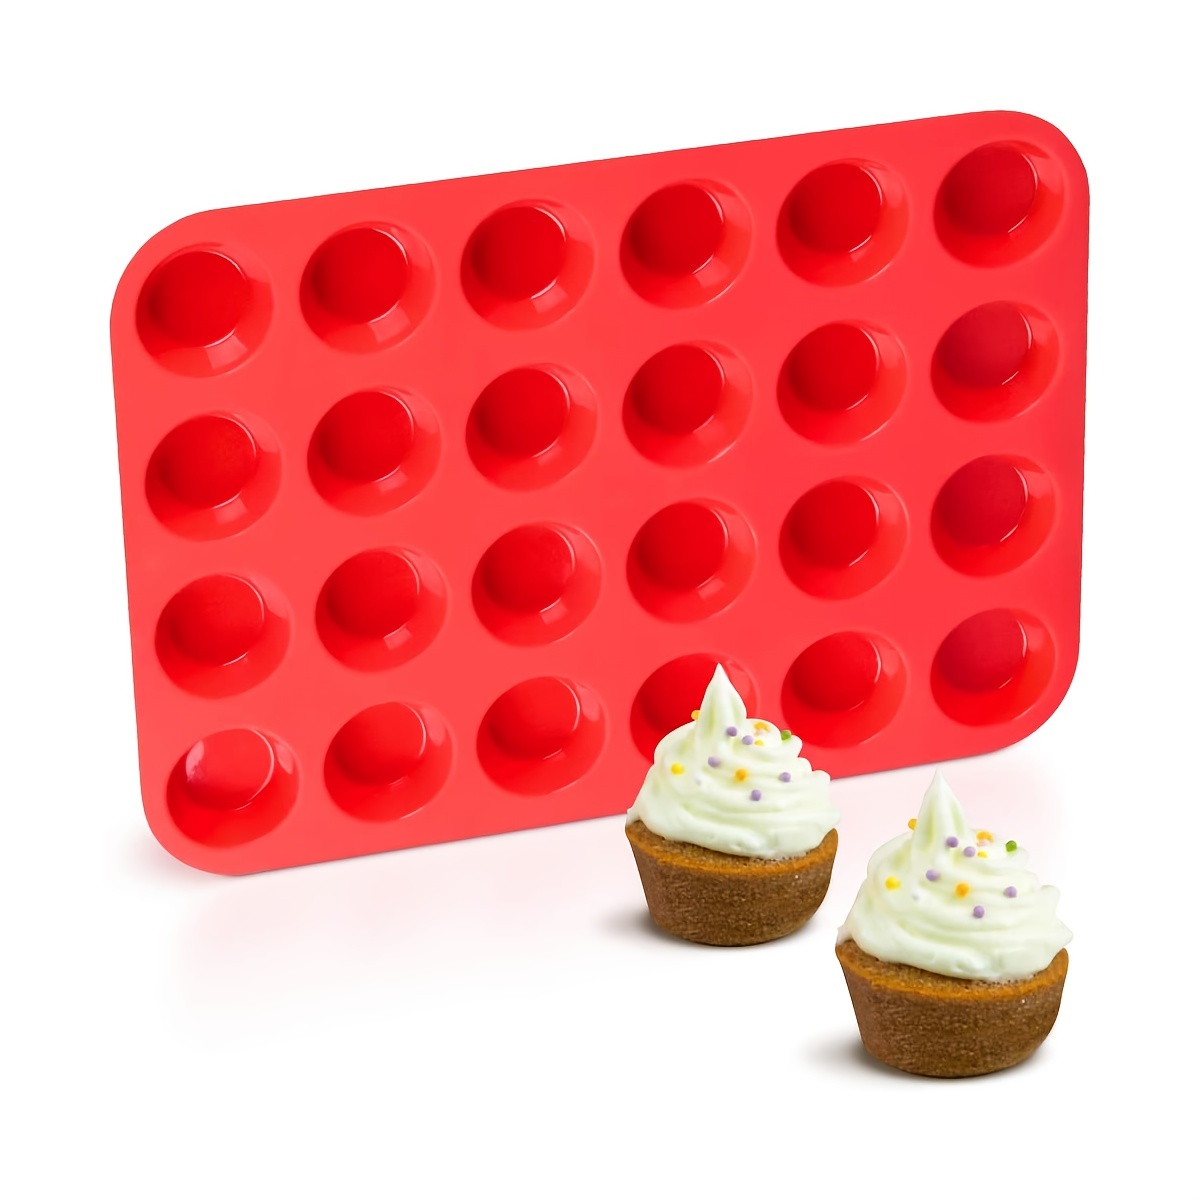  Commercial Bakeware Large Muffin Pan, 24-Cup: Home